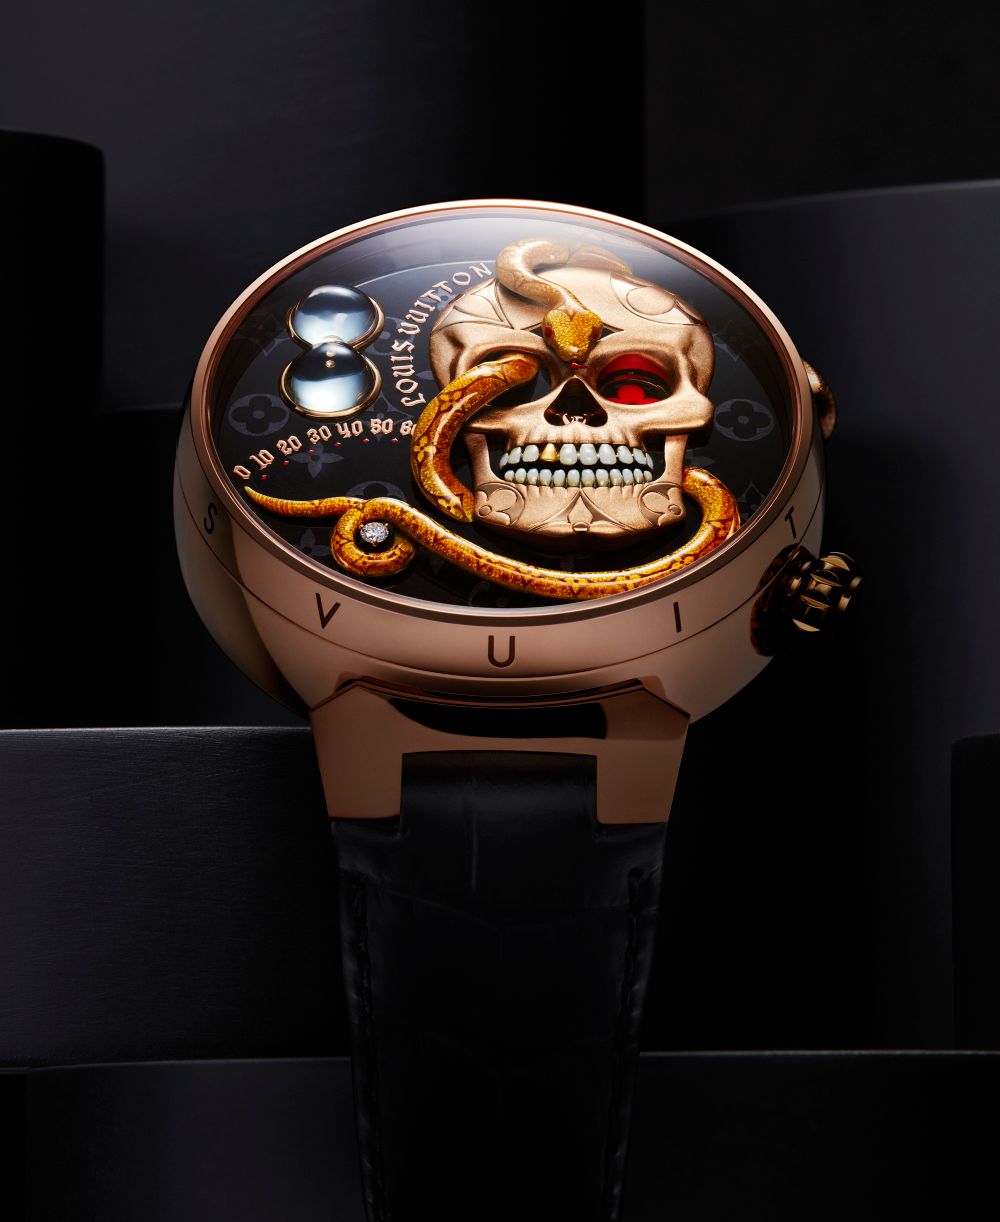 Louis Vuitton Debuts Their Tambour Street Diver Watch - The Luxury Editor